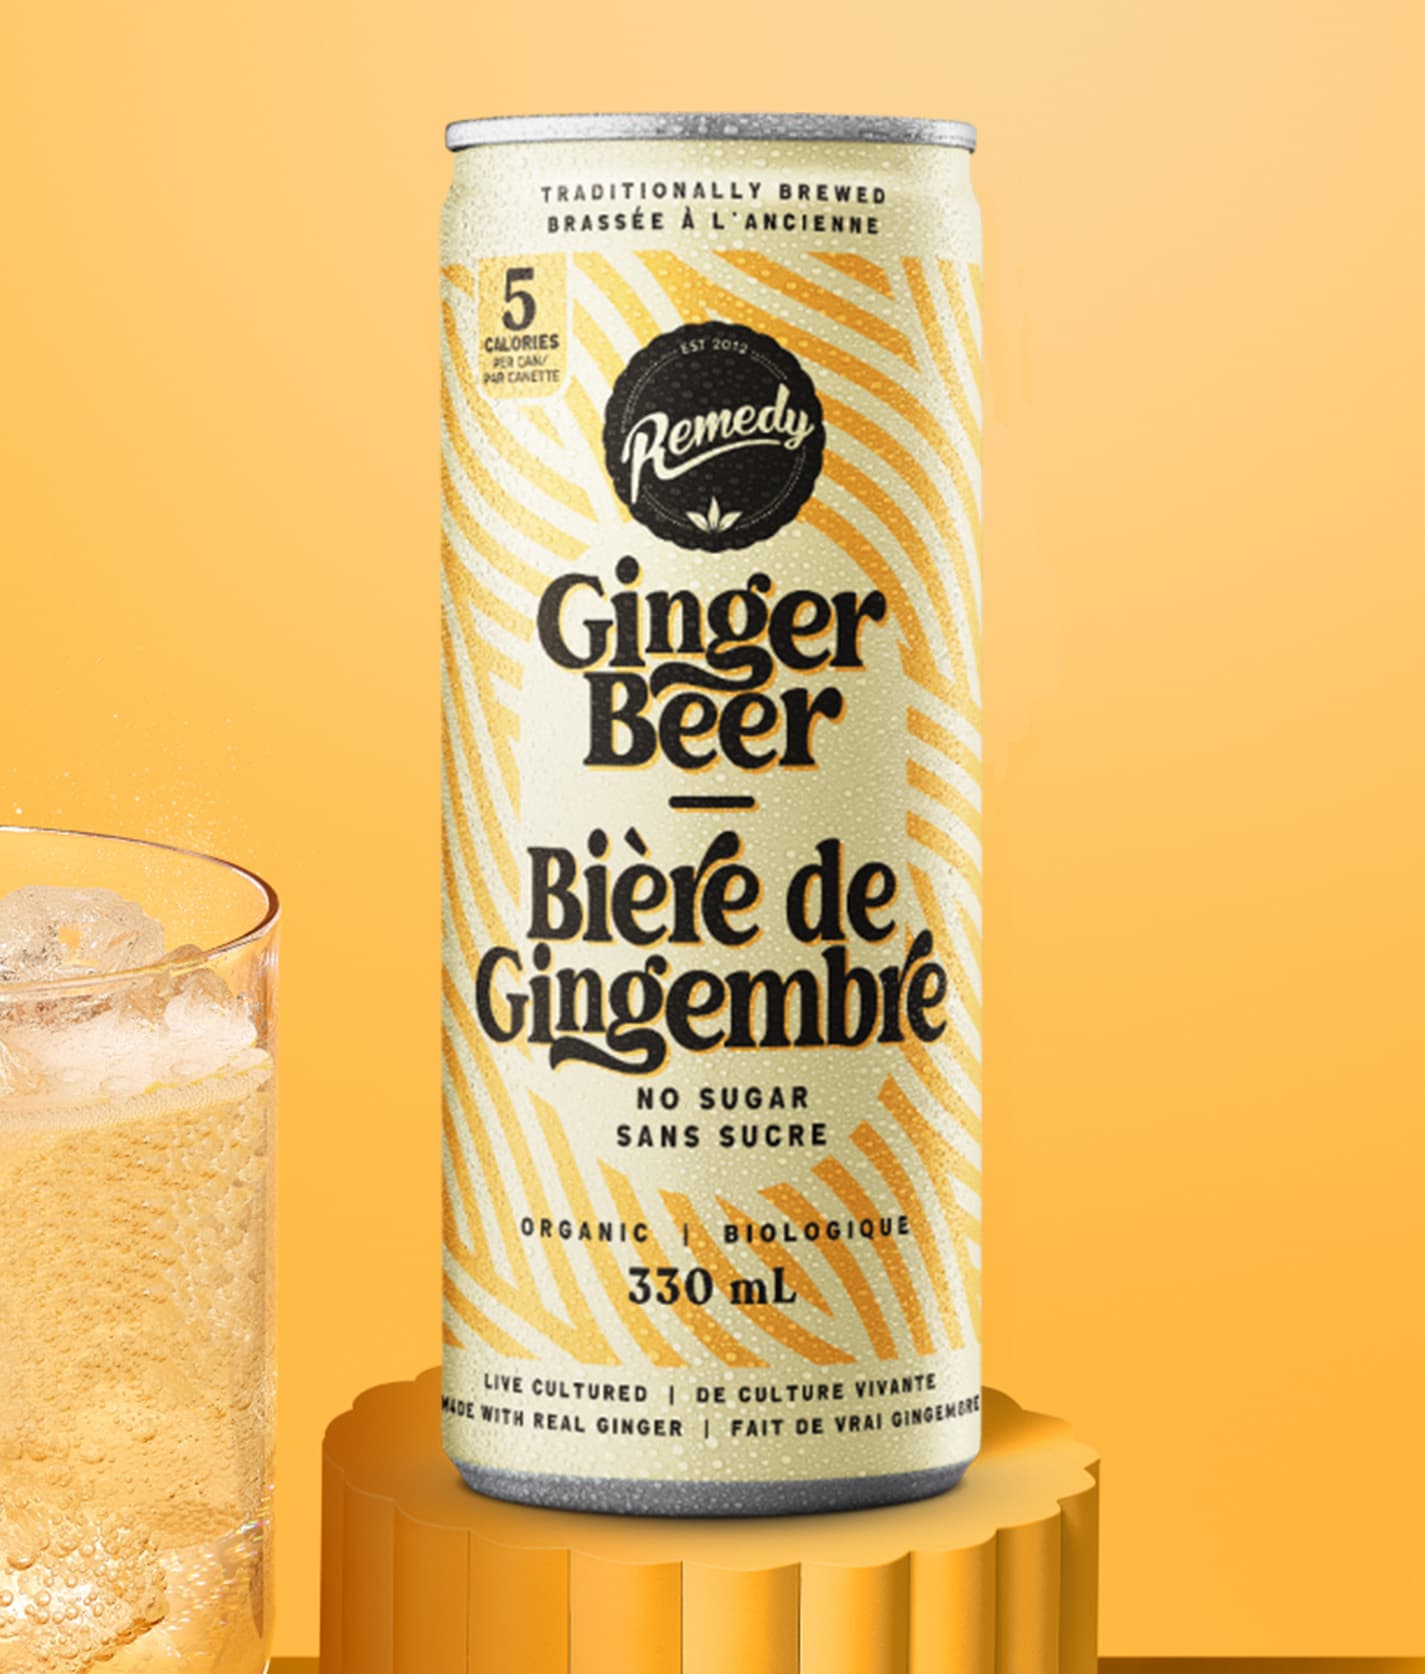 Ginger Beer can with glass